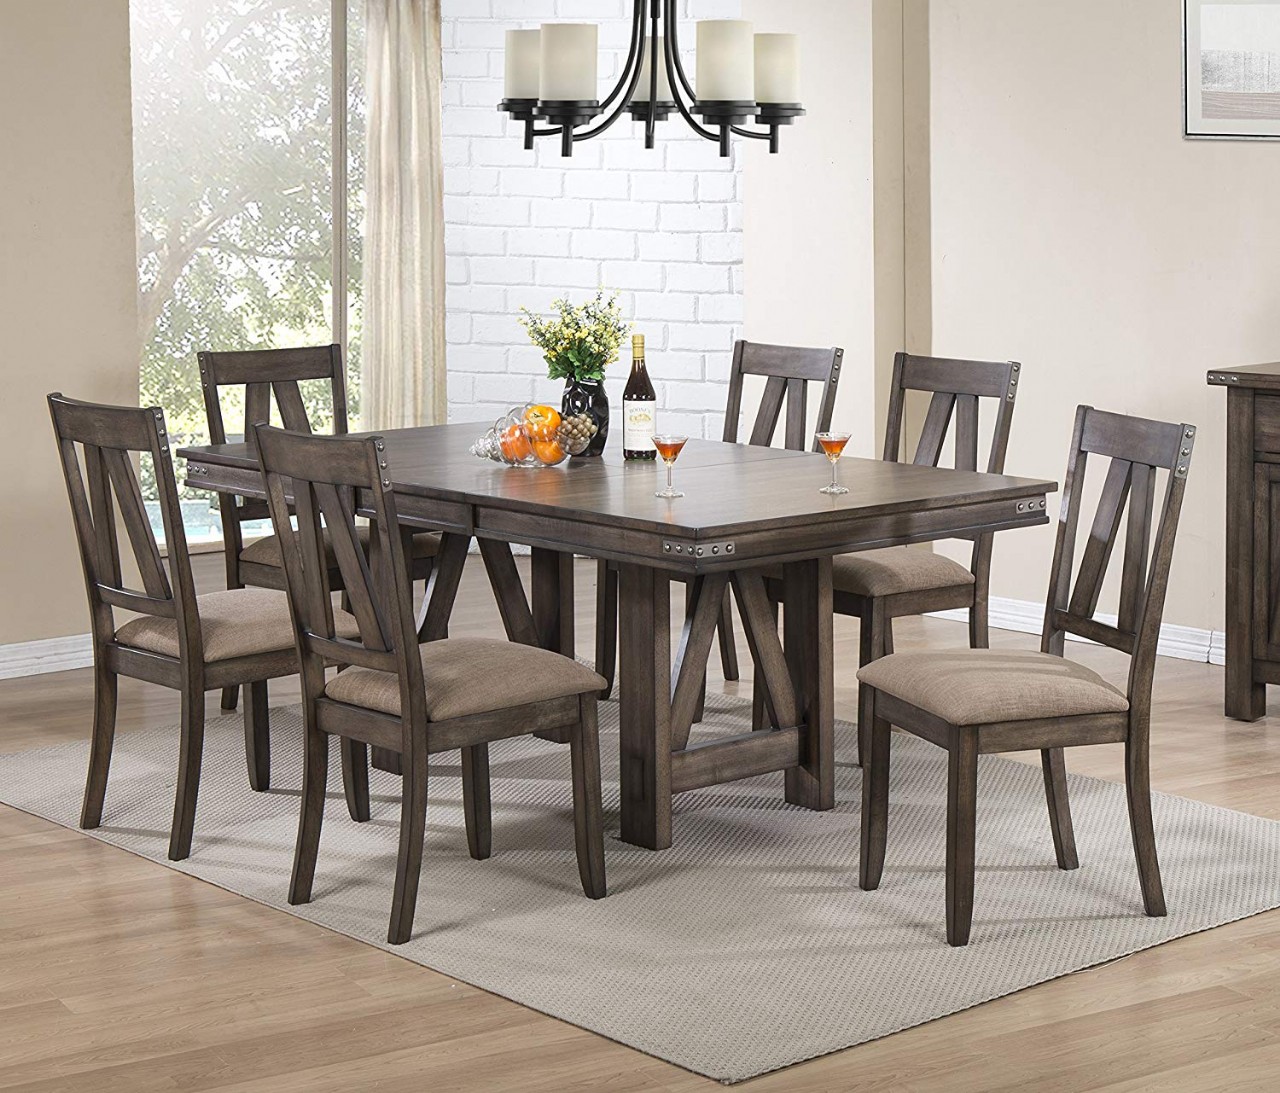 Dining Table Chair Sets Best Furniture Beige Linen Look Upholstered